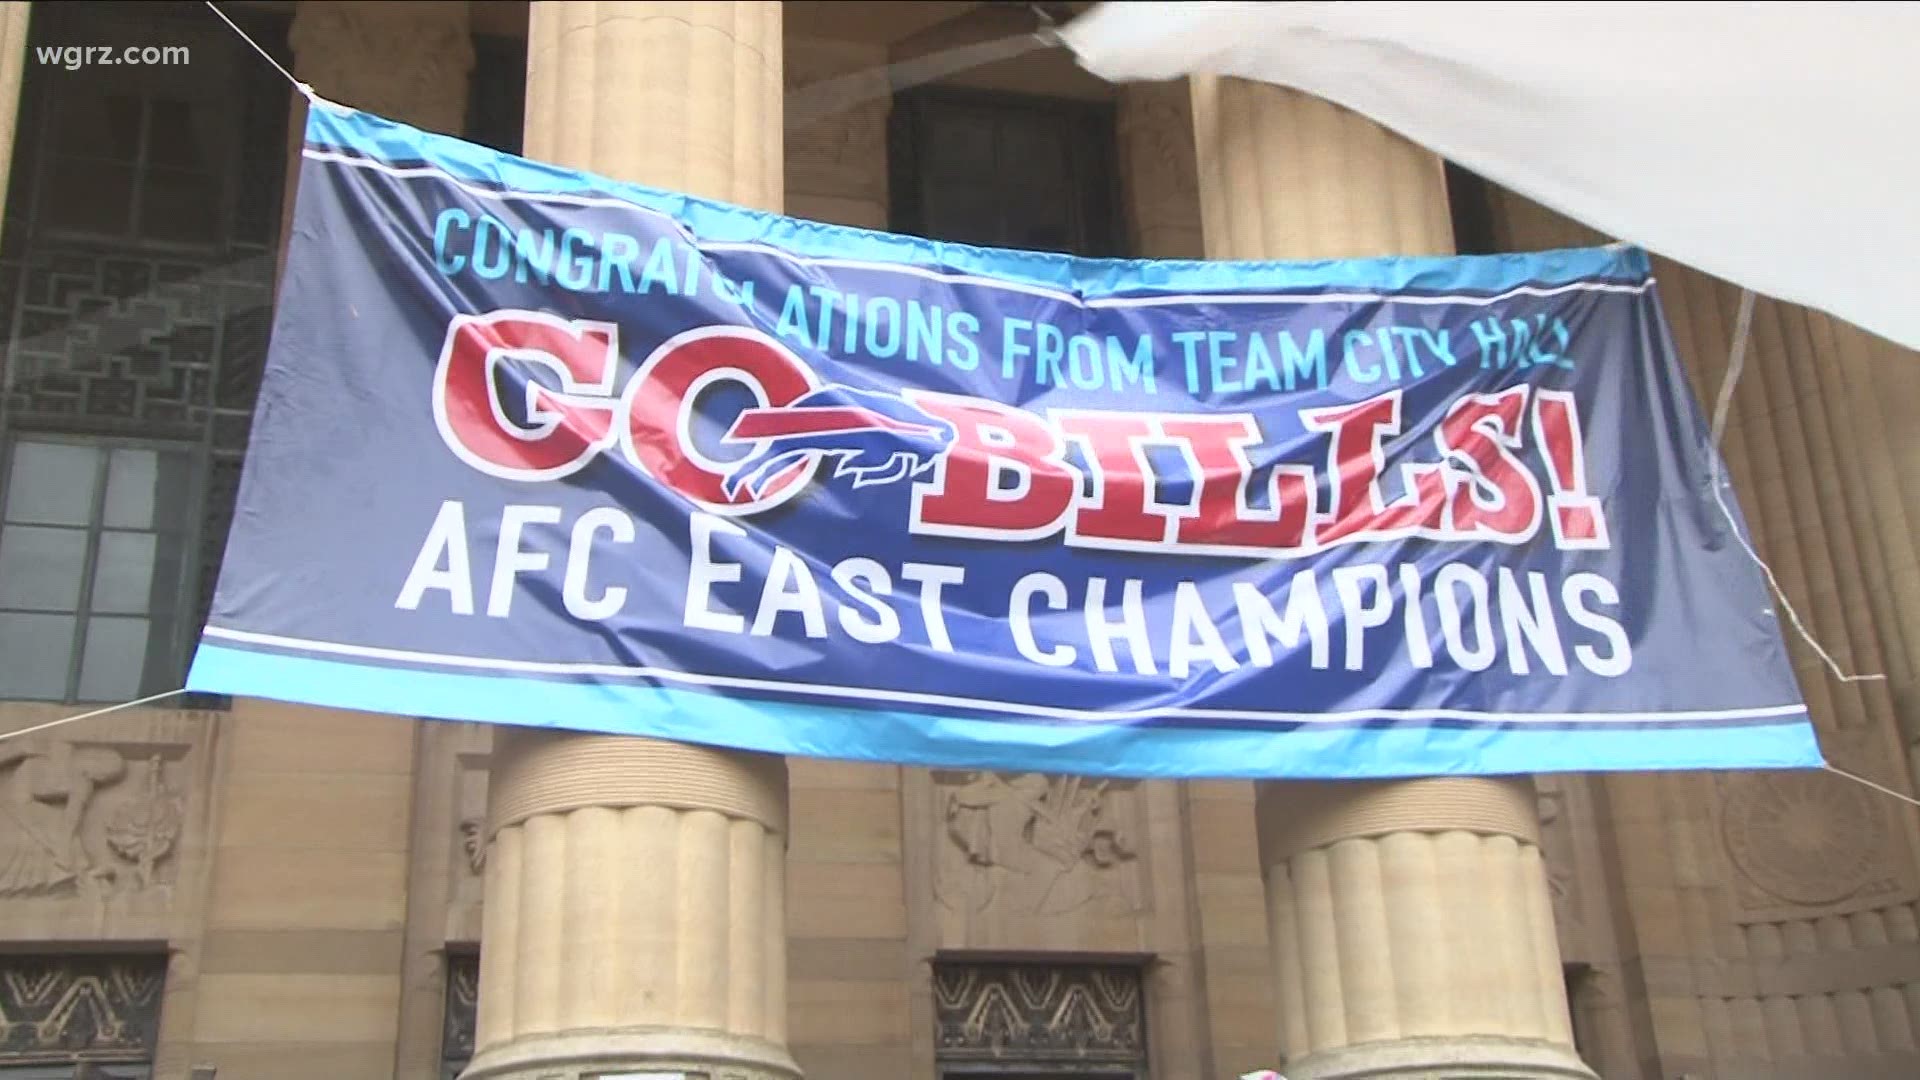 Mayor Byron Brown excited to share in the team's first AFC east title in 25 years. Check out the decorations!